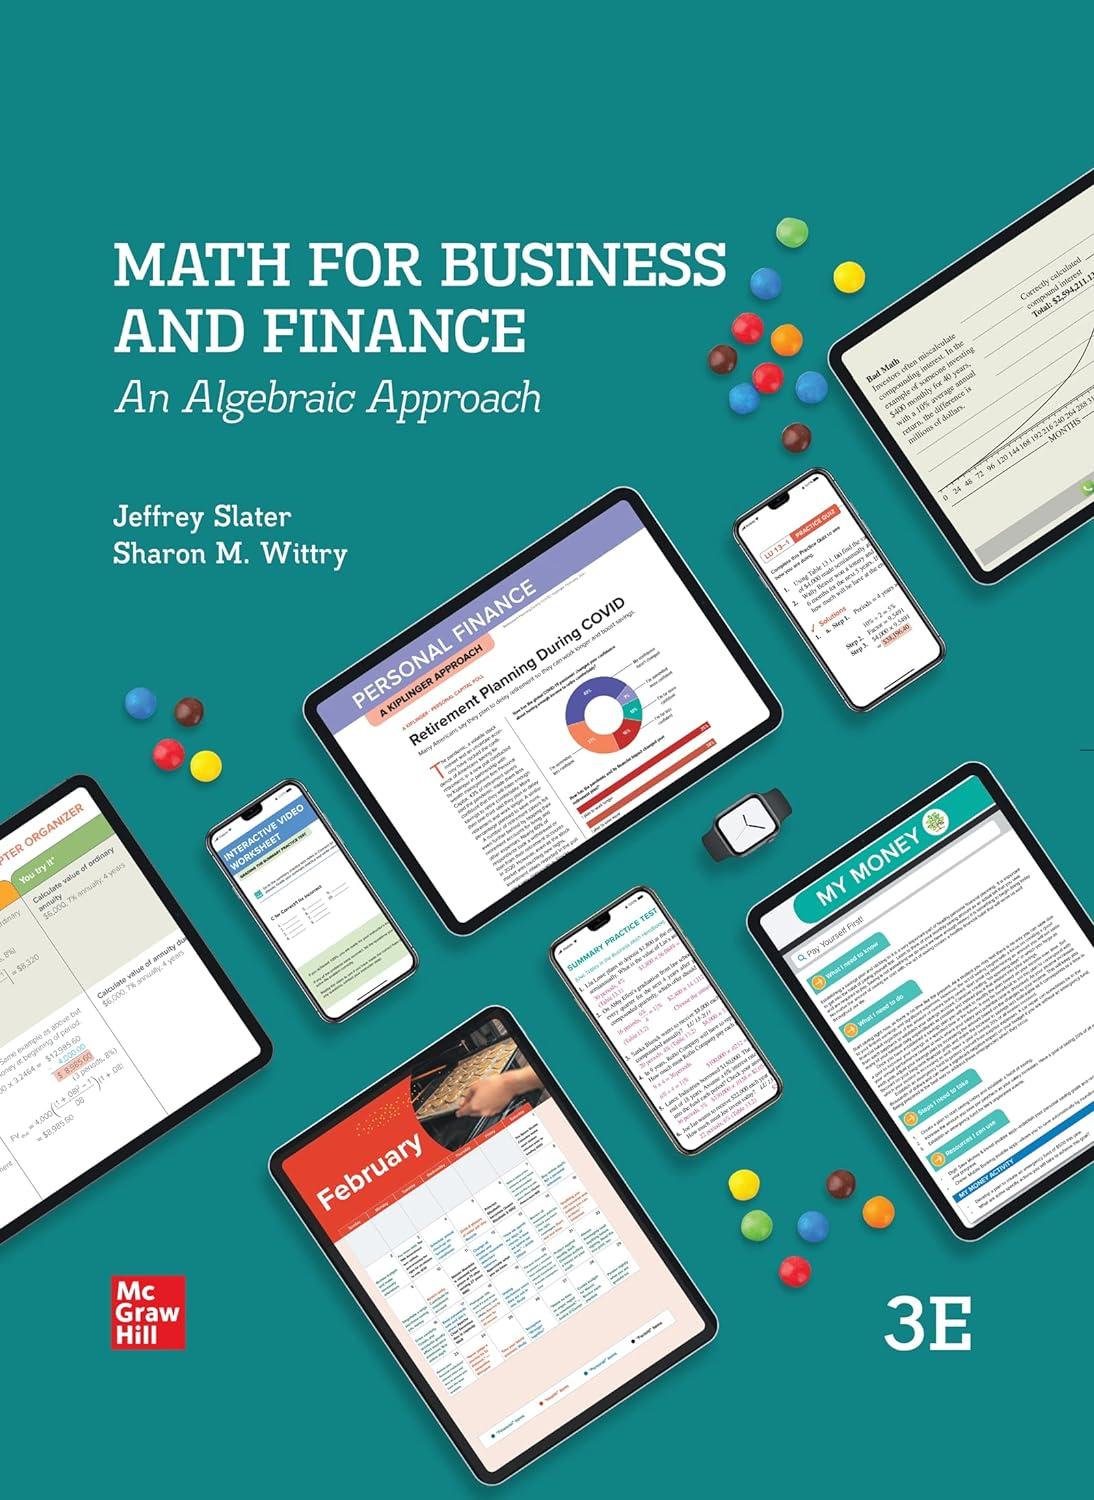 math for business and finance an algebraic approach 3rd edition jeffrey slater, sharon wittry 1260716325,